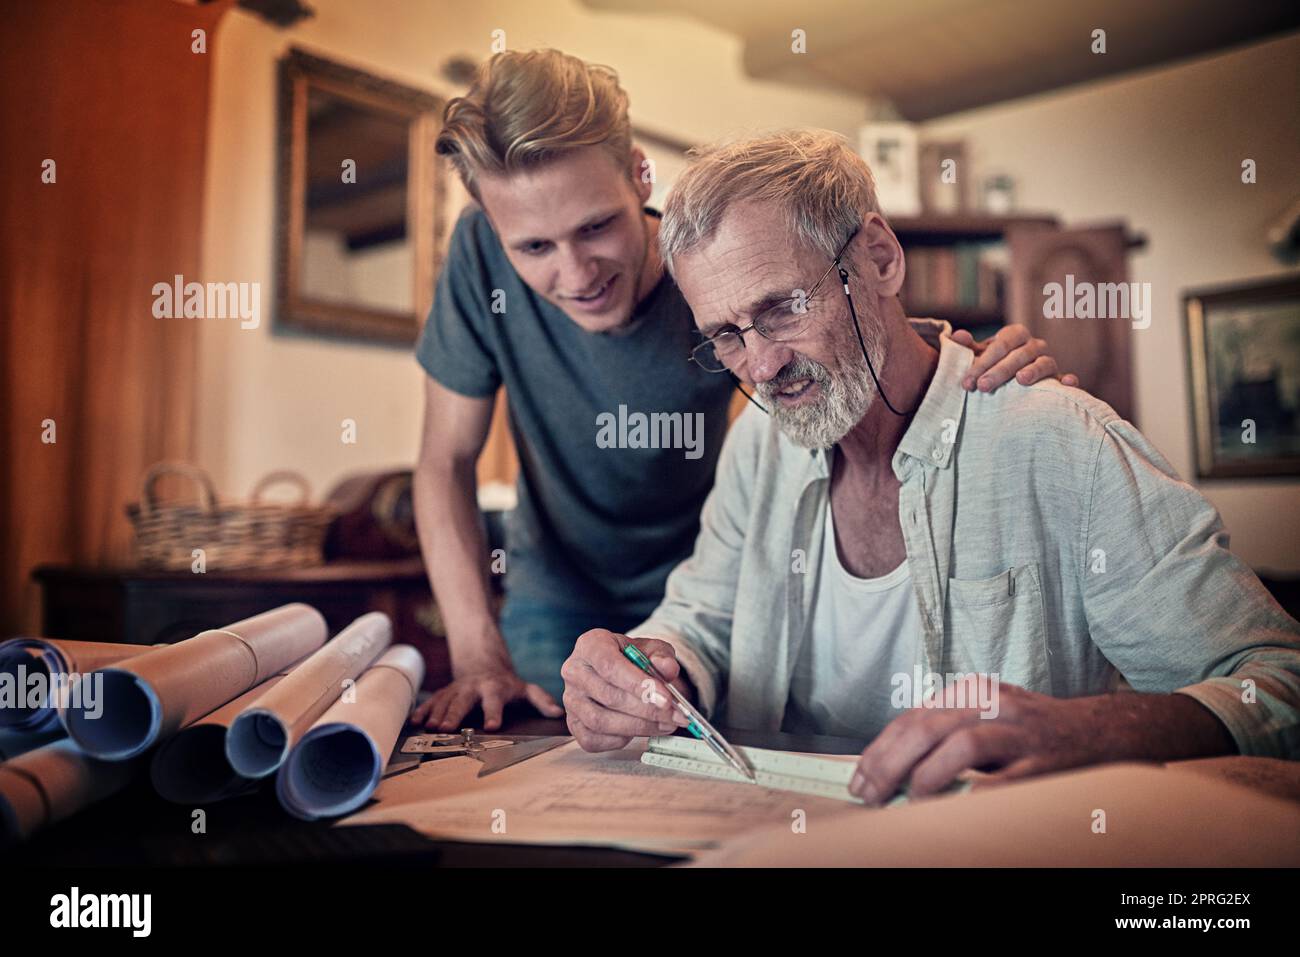 Two minds are better than one. a father and his son working on a design for their family business at home. Stock Photo